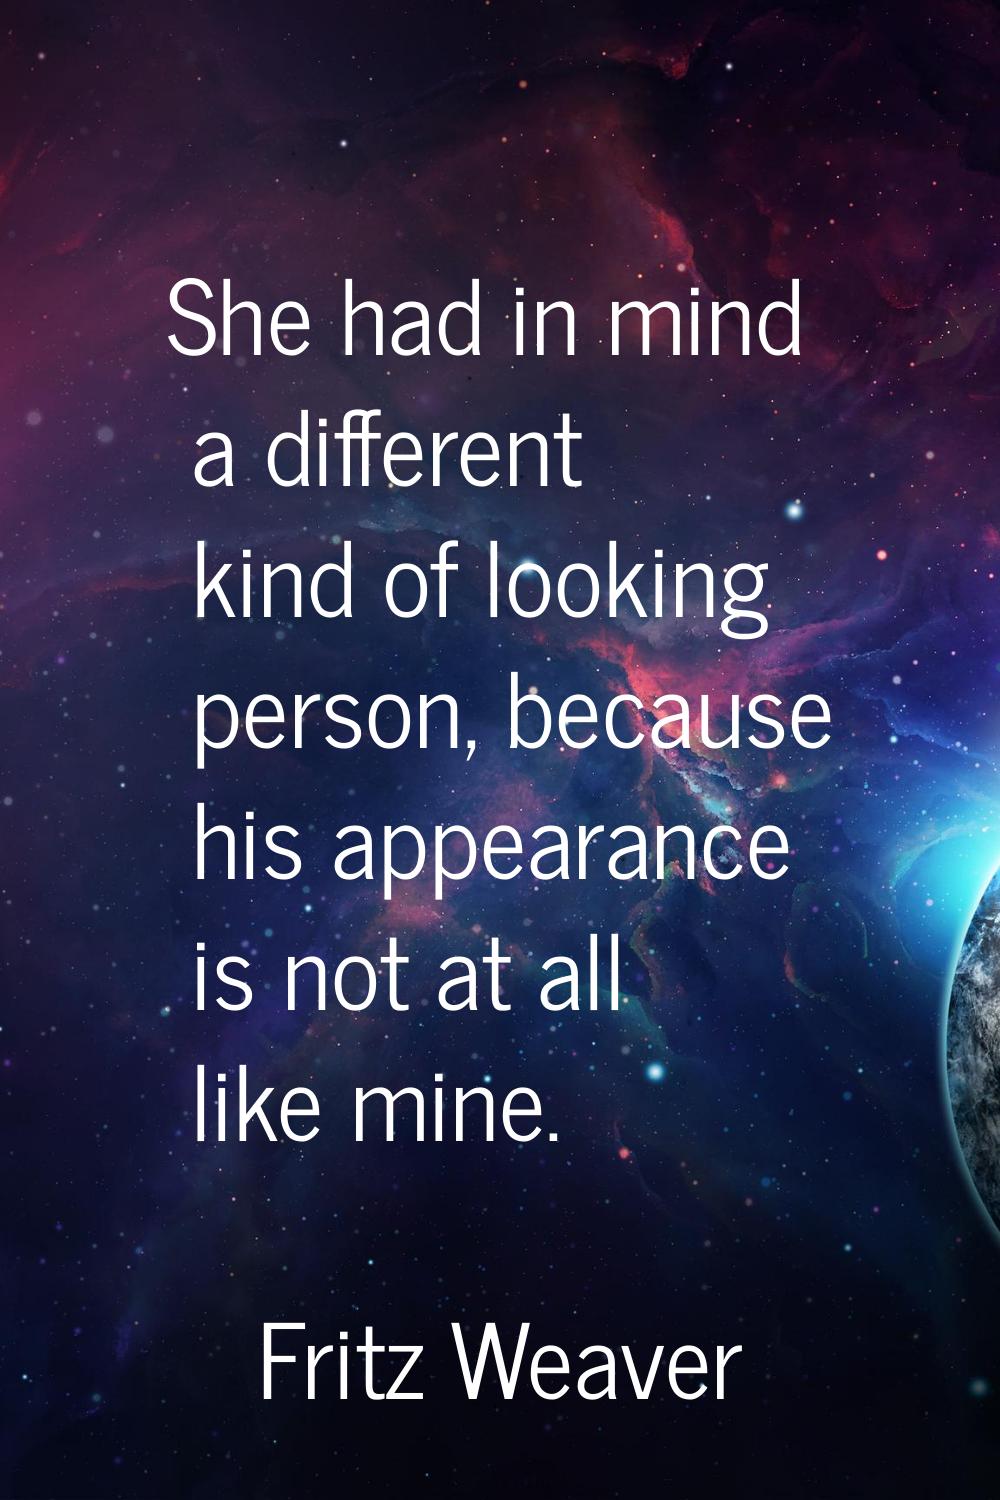 She had in mind a different kind of looking person, because his appearance is not at all like mine.